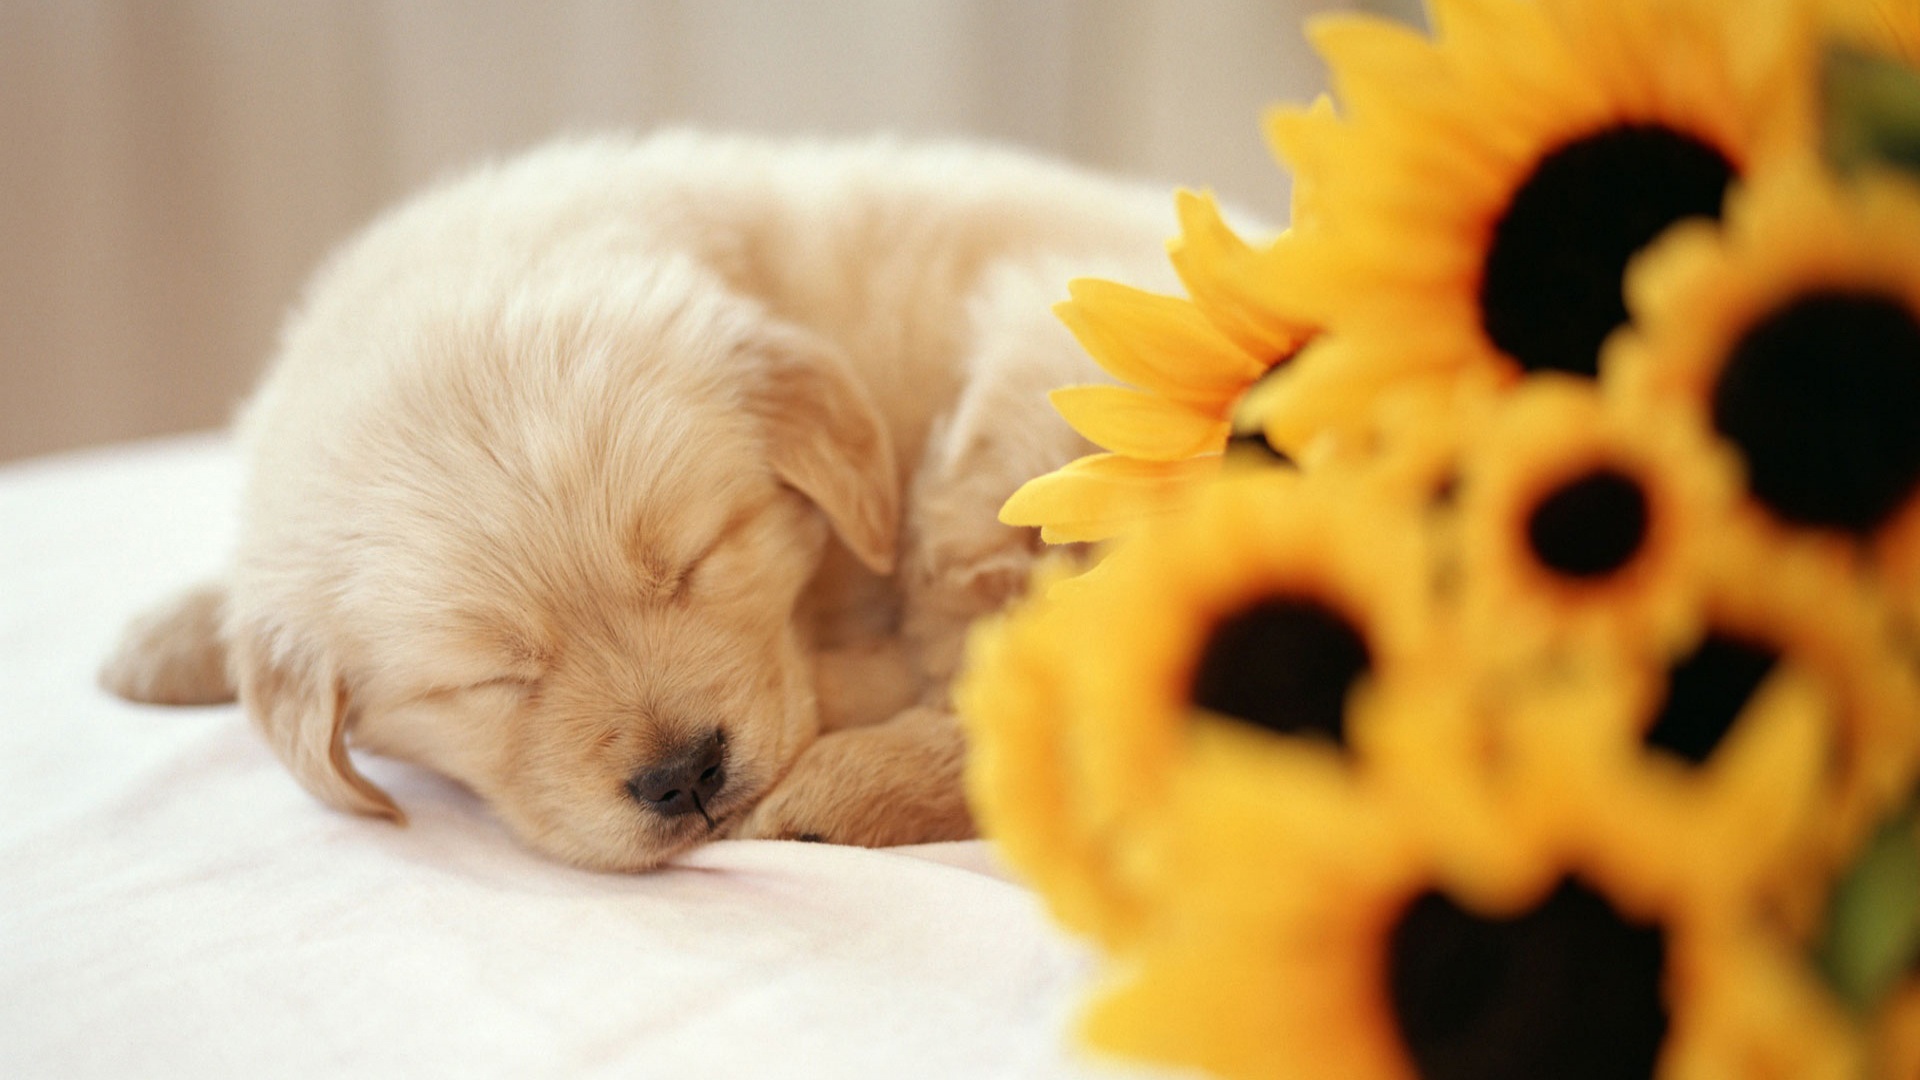 Spring Desktop Backgrounds with Puppies   HD Wallpapers